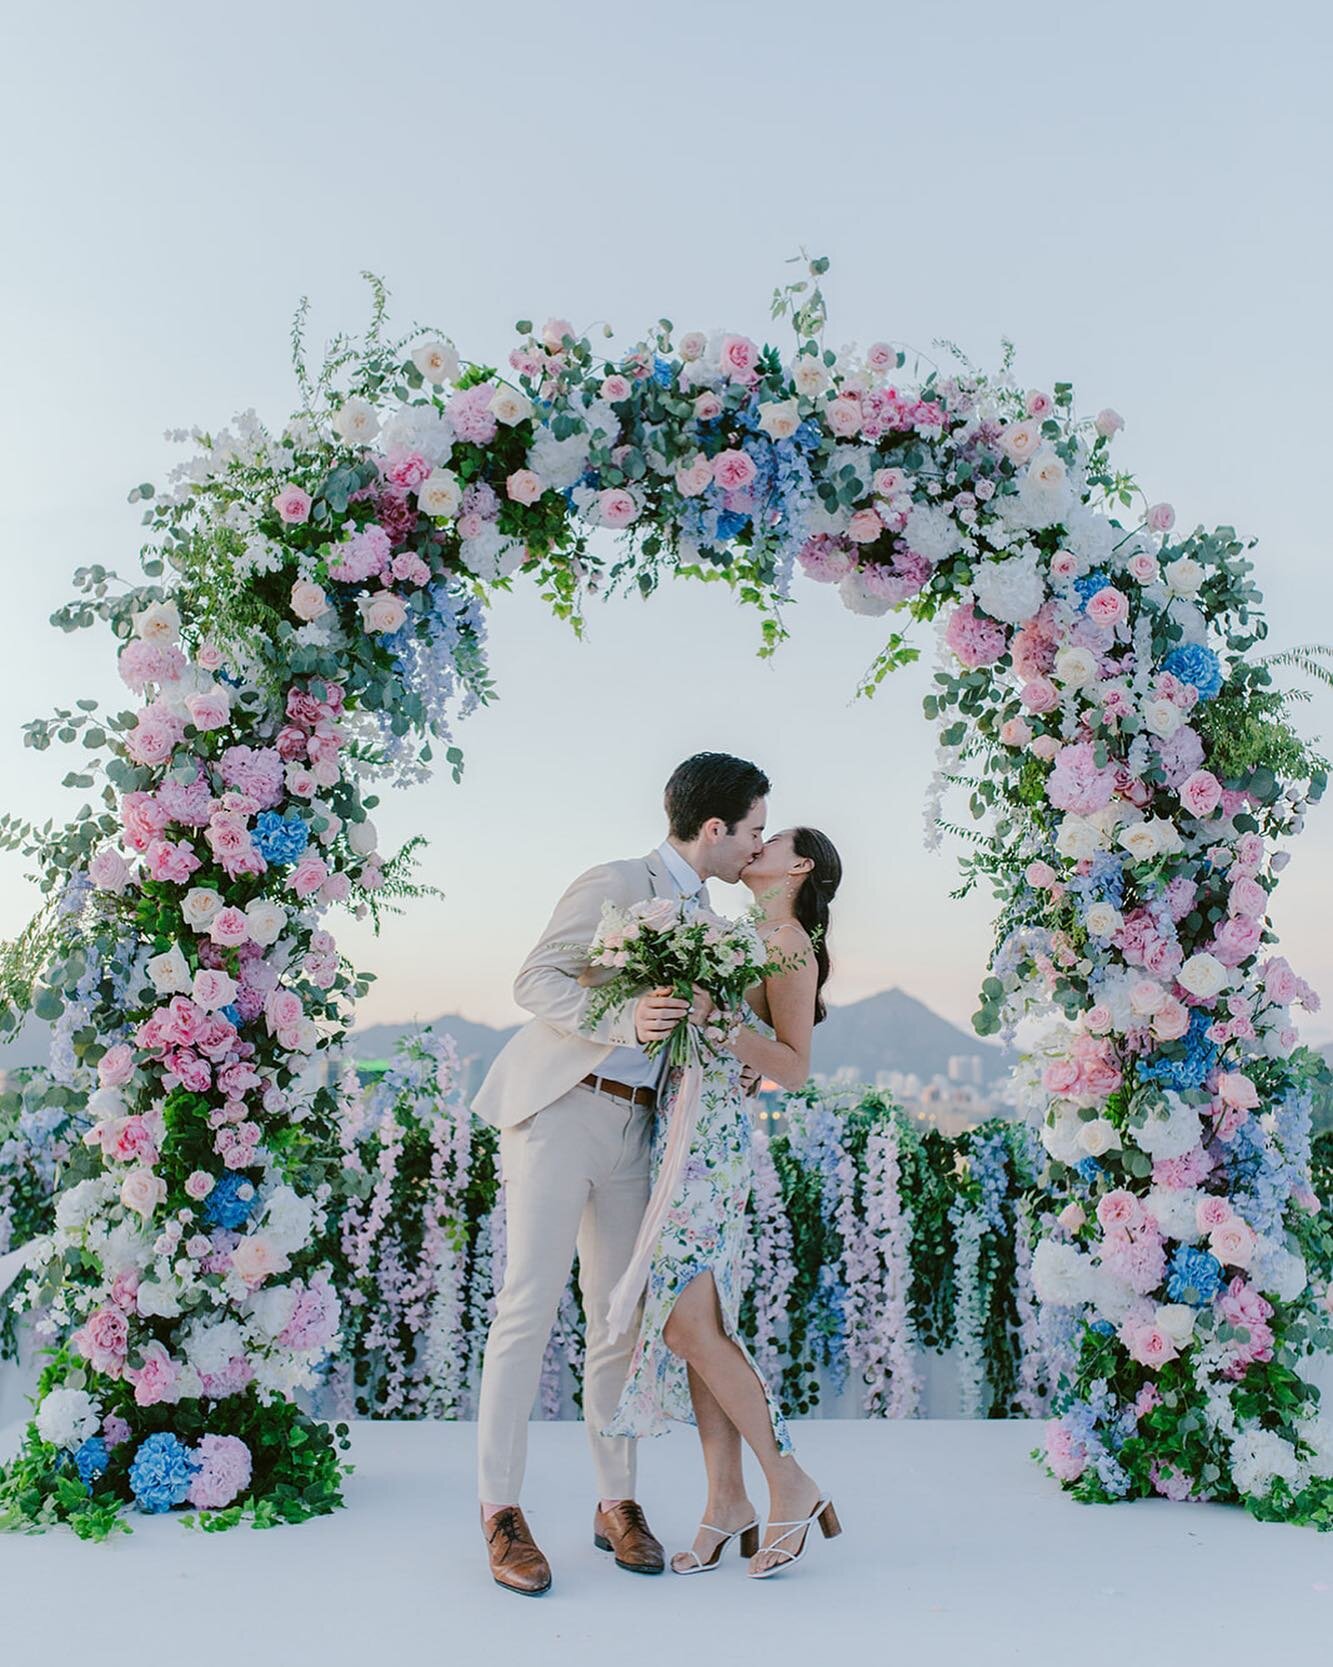 The most epic proposal! More on stories! 

Planning &amp; styling @afatelier 
Hmua @xingmaquillage @xingpresente 
Video @johnnyproductions
Decorations @weddinggardenltd 
Bouquet @fiori_florals 
Stationary @whalewhispers_ 
Illustration @daylight.lette